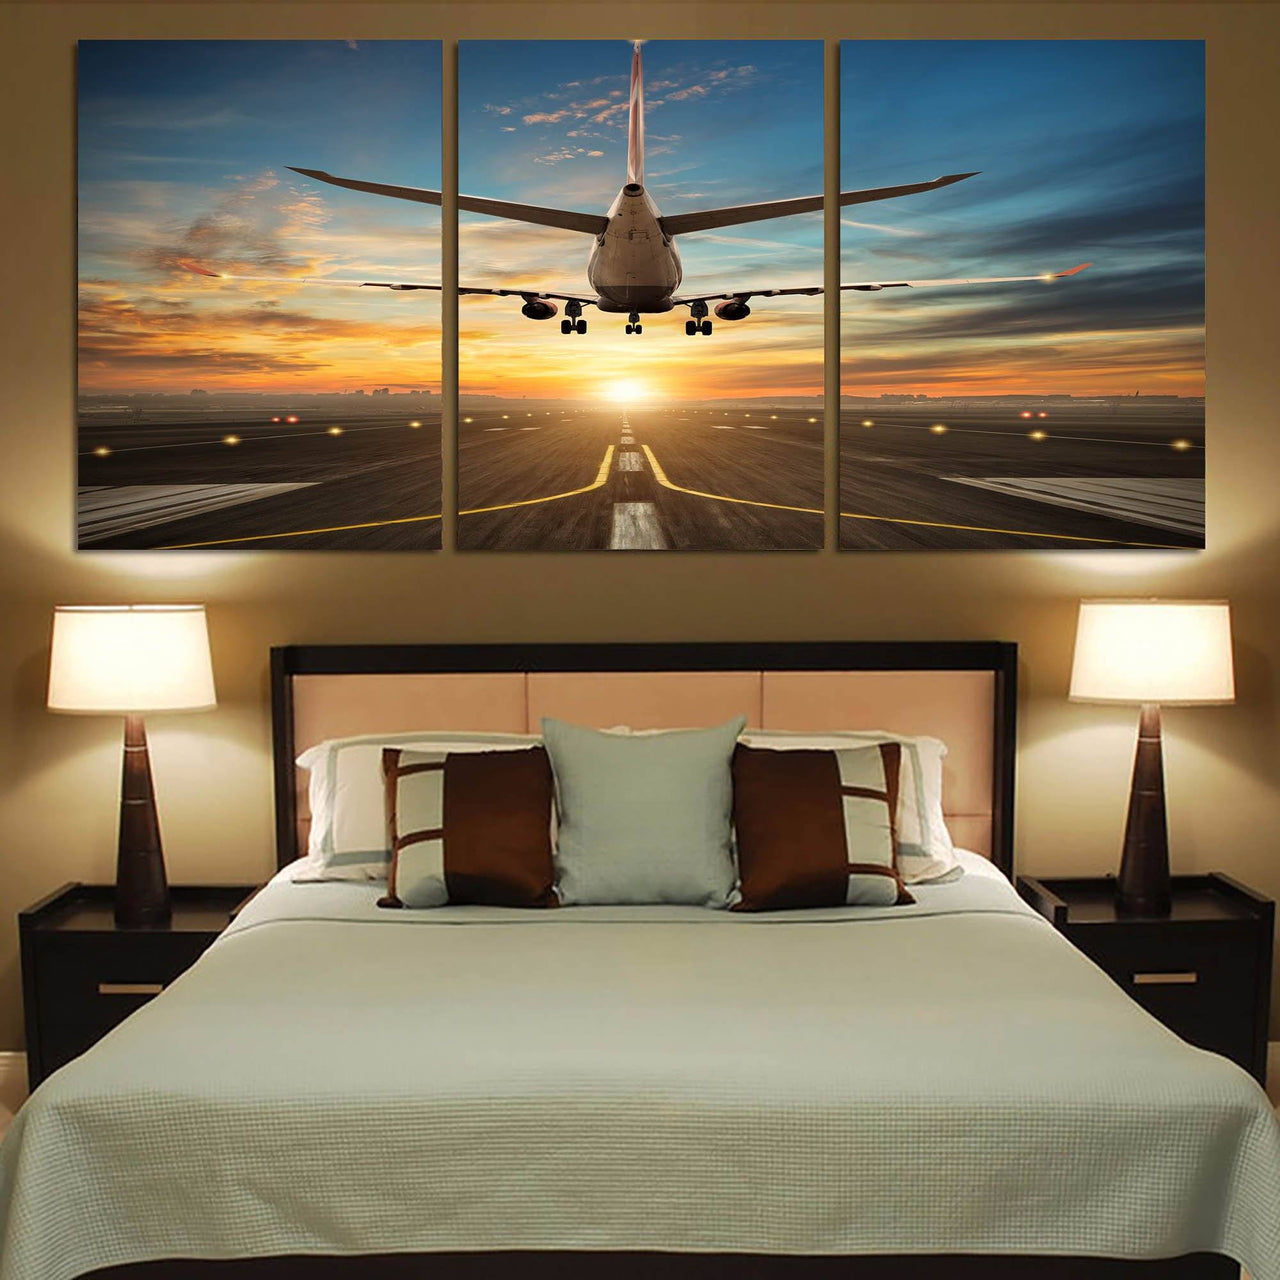 Airplane over Runway Towards the Sunrise Printed Printed Canvas Posters (3 Pieces) Aviation Shop 